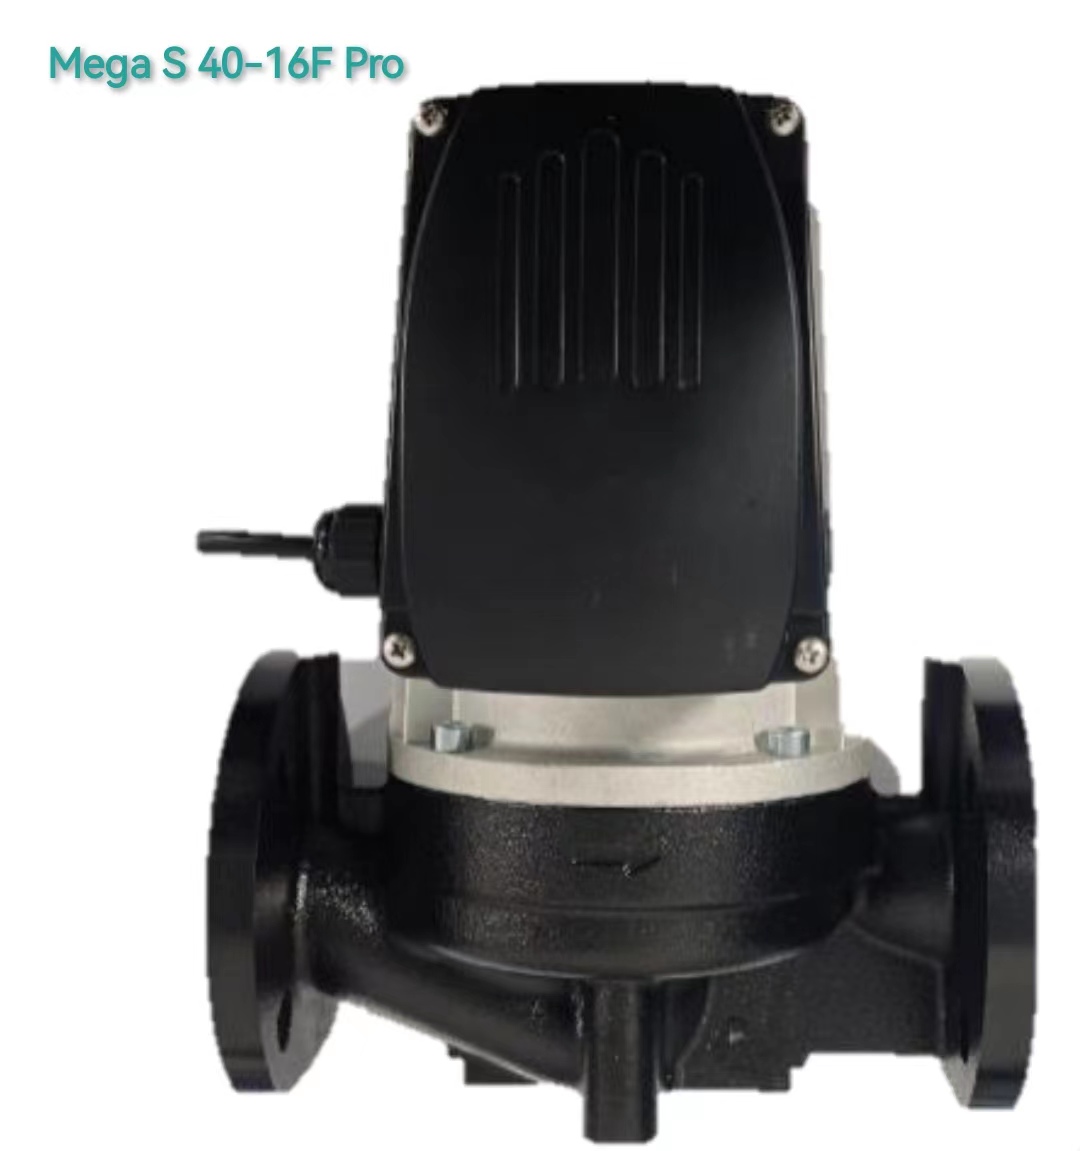 Shinhoo Mega S 40-16F Pro: The Ultimate High-Power Canned Motor Pump with Enhanced Noise Reduction